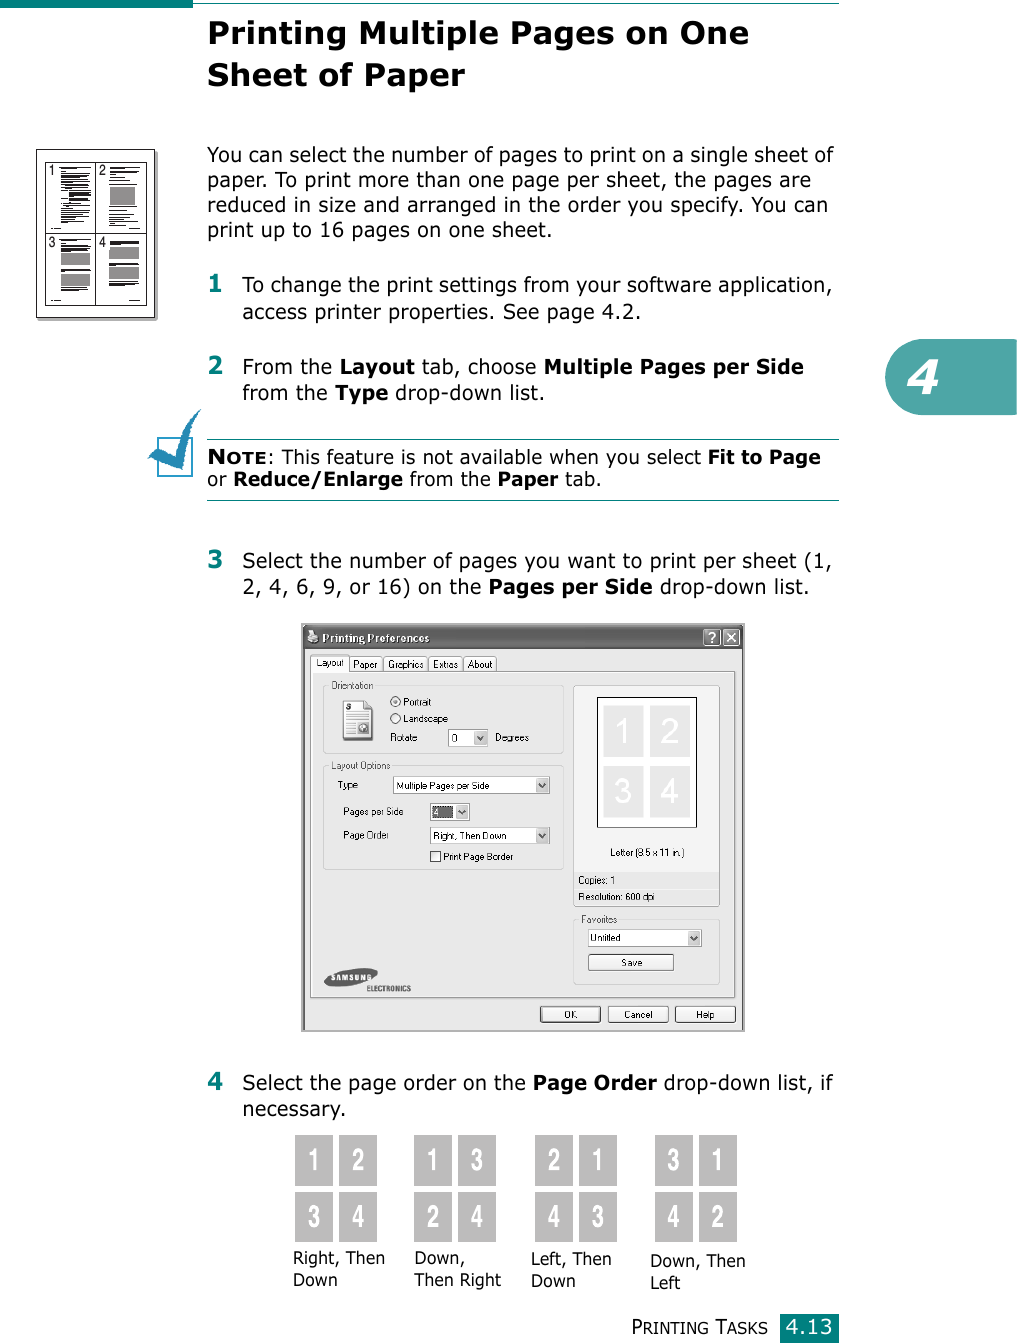 4PRINTING TASKS4.13Printing Multiple Pages on One Sheet of Paper You can select the number of pages to print on a single sheet of paper. To print more than one page per sheet, the pages are reduced in size and arranged in the order you specify. You can print up to 16 pages on one sheet. 1To change the print settings from your software application, access printer properties. See page 4.2.2From the Layout tab, choose Multiple Pages per Side from the Type drop-down list. NOTE: This feature is not available when you select Fit to Page or Reduce/Enlarge from the Paper tab.3Select the number of pages you want to print per sheet (1, 2, 4, 6, 9, or 16) on the Pages per Side drop-down list.4Select the page order on the Page Order drop-down list, if necessary.1 23 4Right, Then DownDown, Then RightLeft, Then DownDown, Then Left